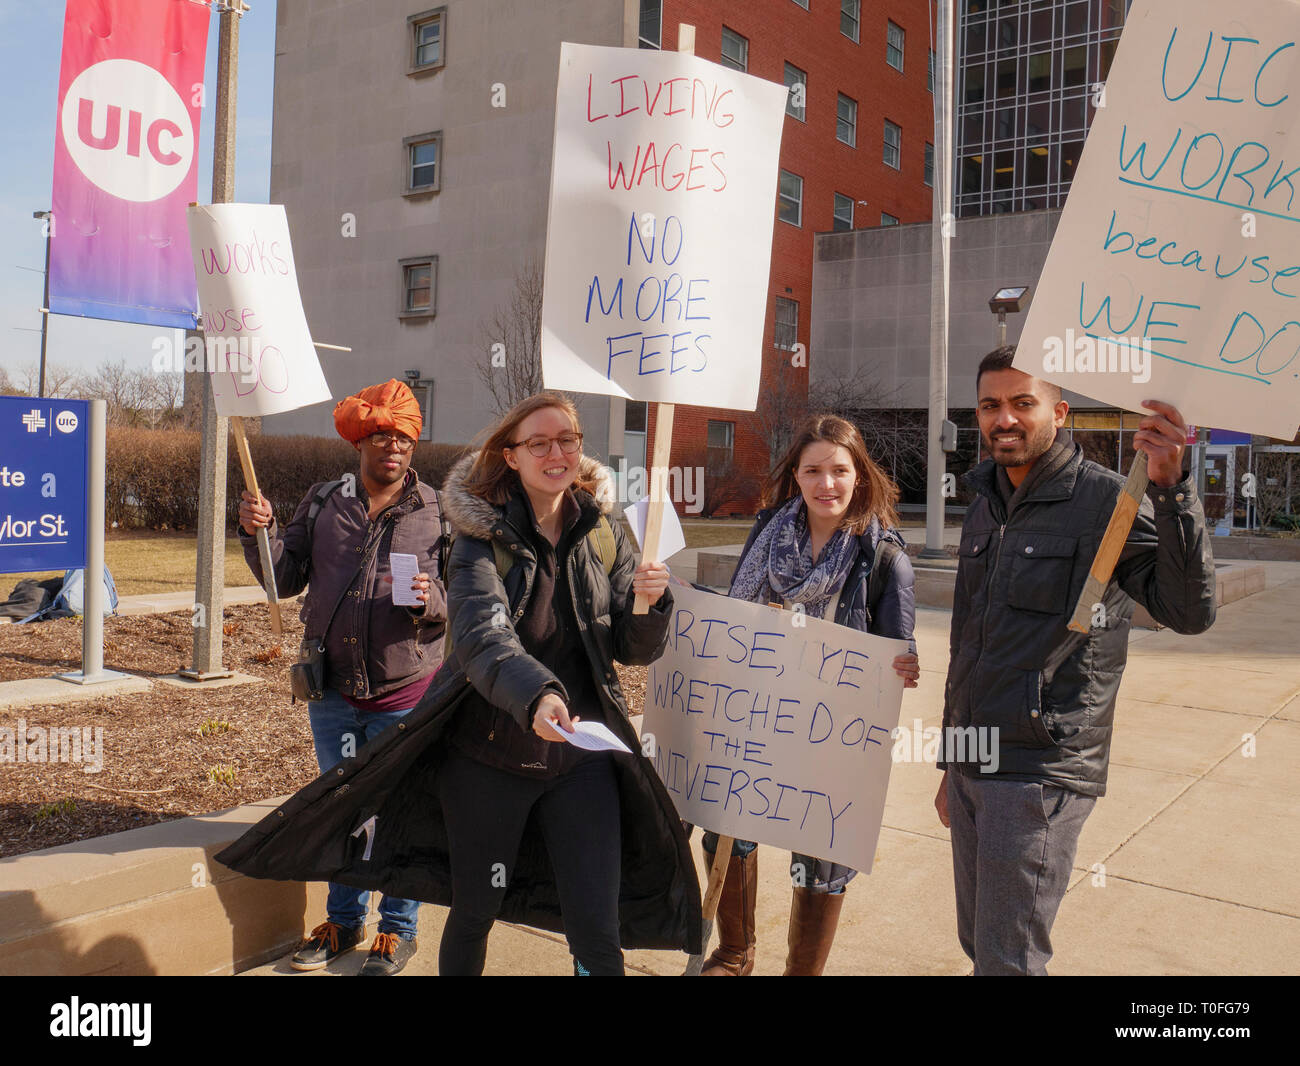 Chicago, Illinois, USA. 19th March 2019.  Graduate Assistants picket in from of the University of Illinois at Chicago's School of Public Health. The graduate workers are asking for a living wage and not having fees equal to 10% of their income deducted from their pay. Credit: Todd Bannor/Alamy Live News Stock Photo